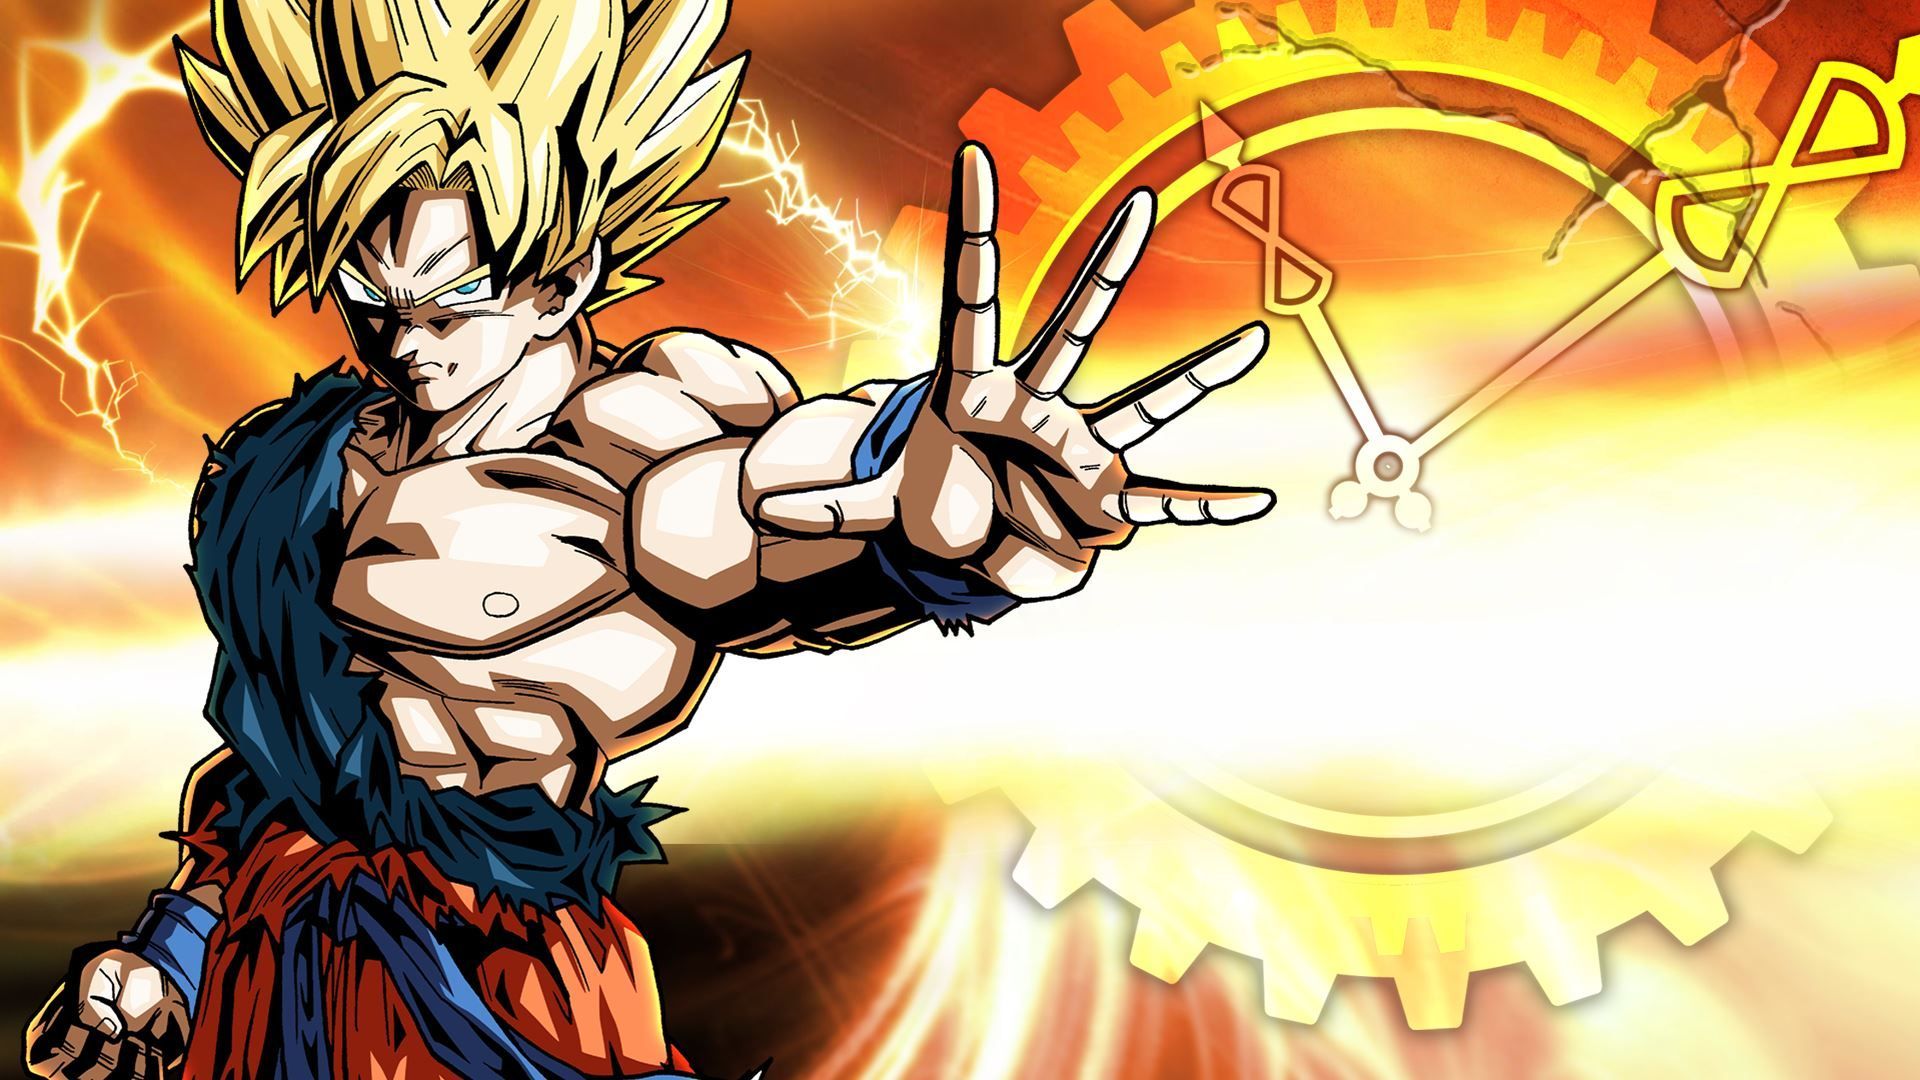 There's a Free Dragon Ball Xenoverse PS4 Theme, You Can Download